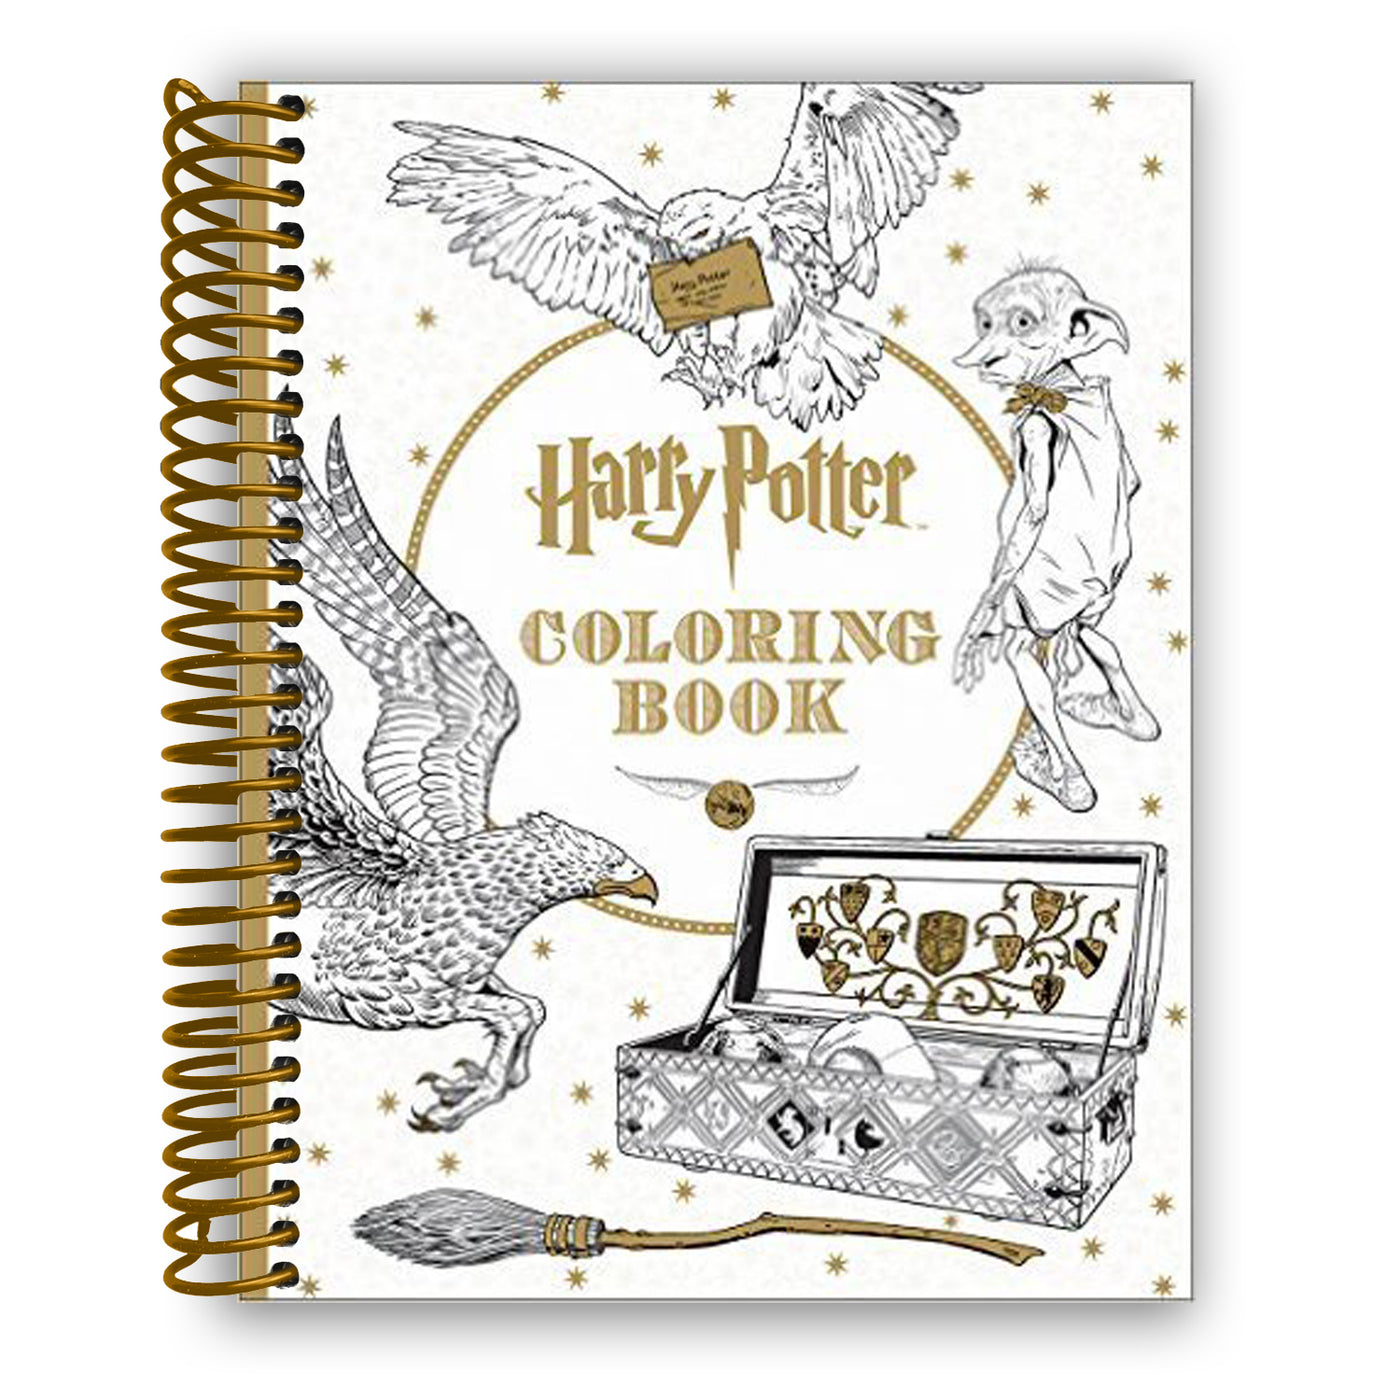 Harry Potter Coloring Book (Spiral Bound)